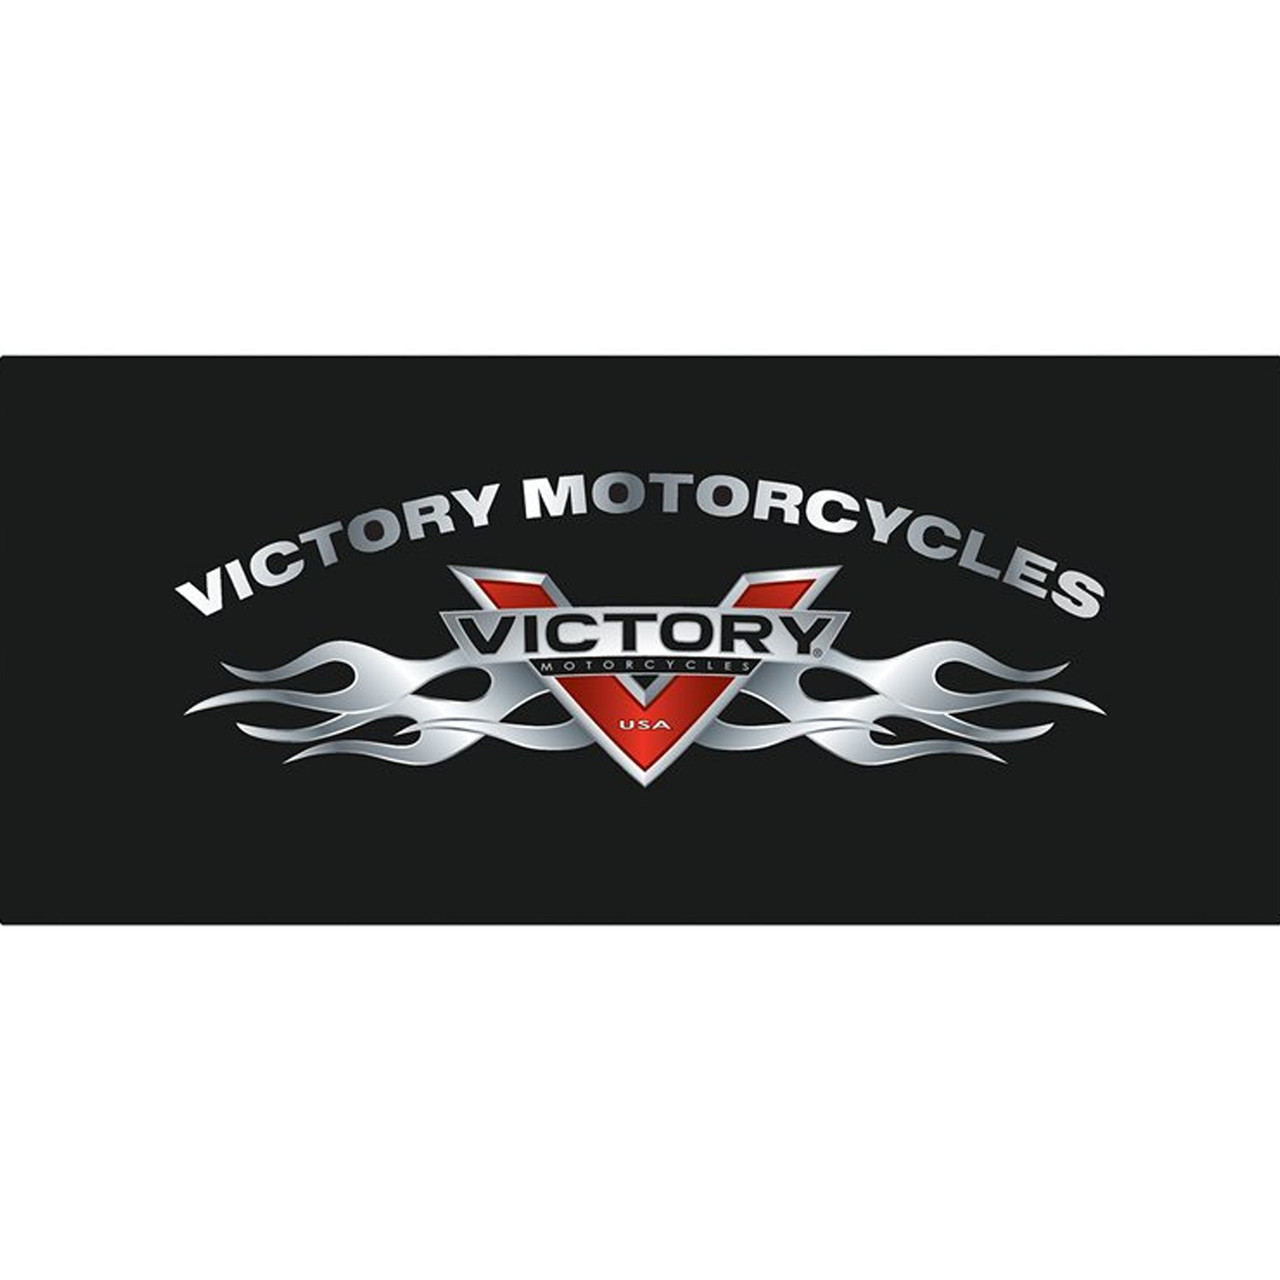 Victory Motorcycles, Vinyl Branded Large Window Decal For Truck Window, 2863888